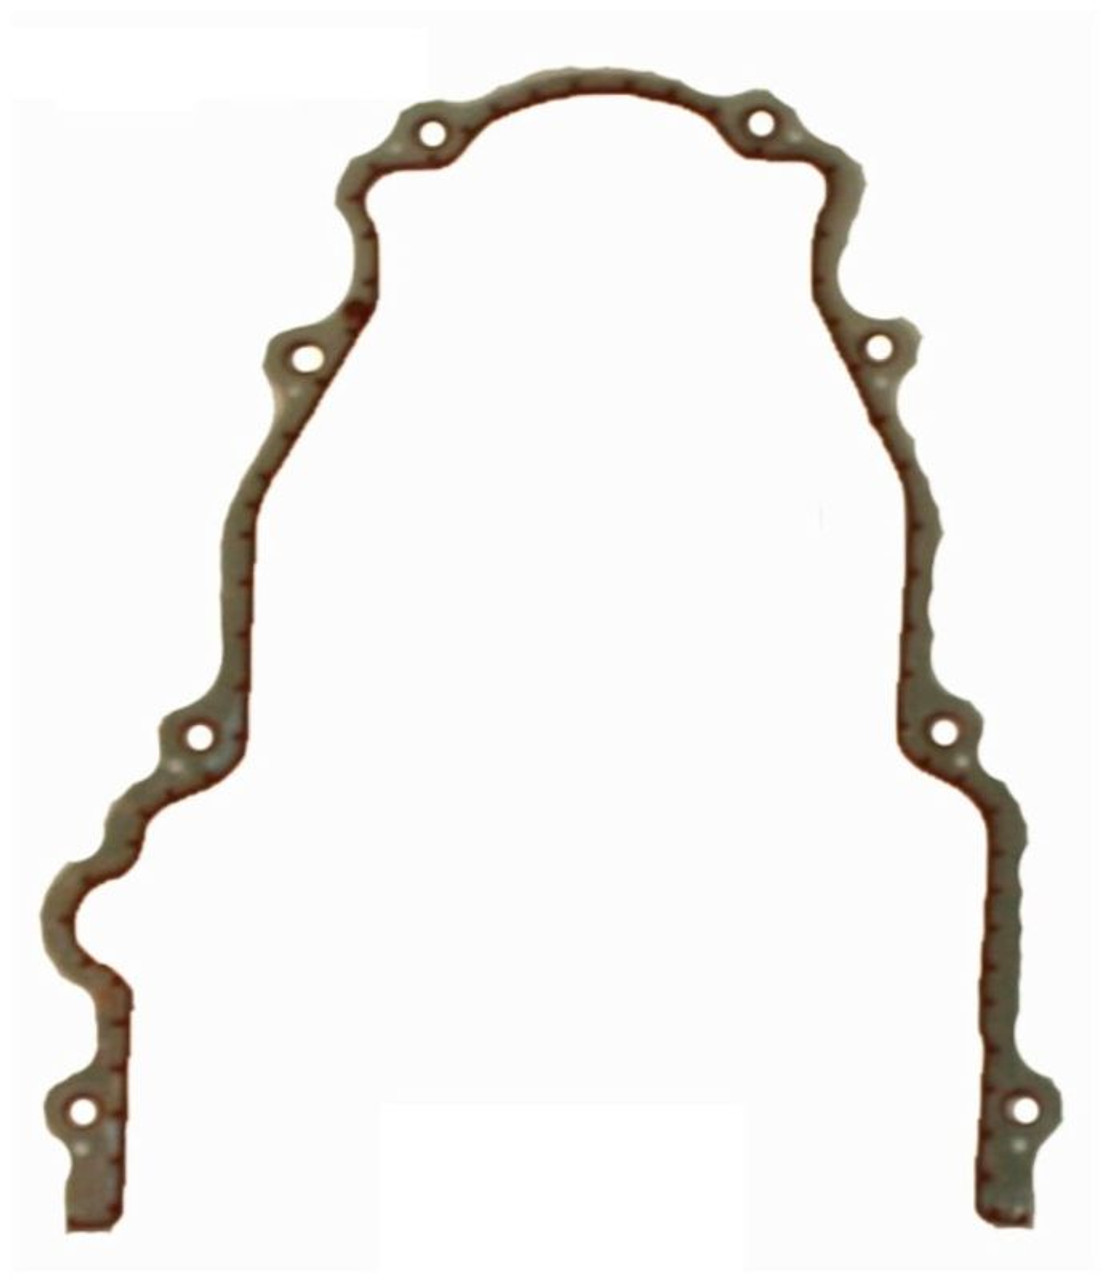 2013 Cadillac Escalade 6.0L Engine Timing Cover Gasket TCG293-A -812